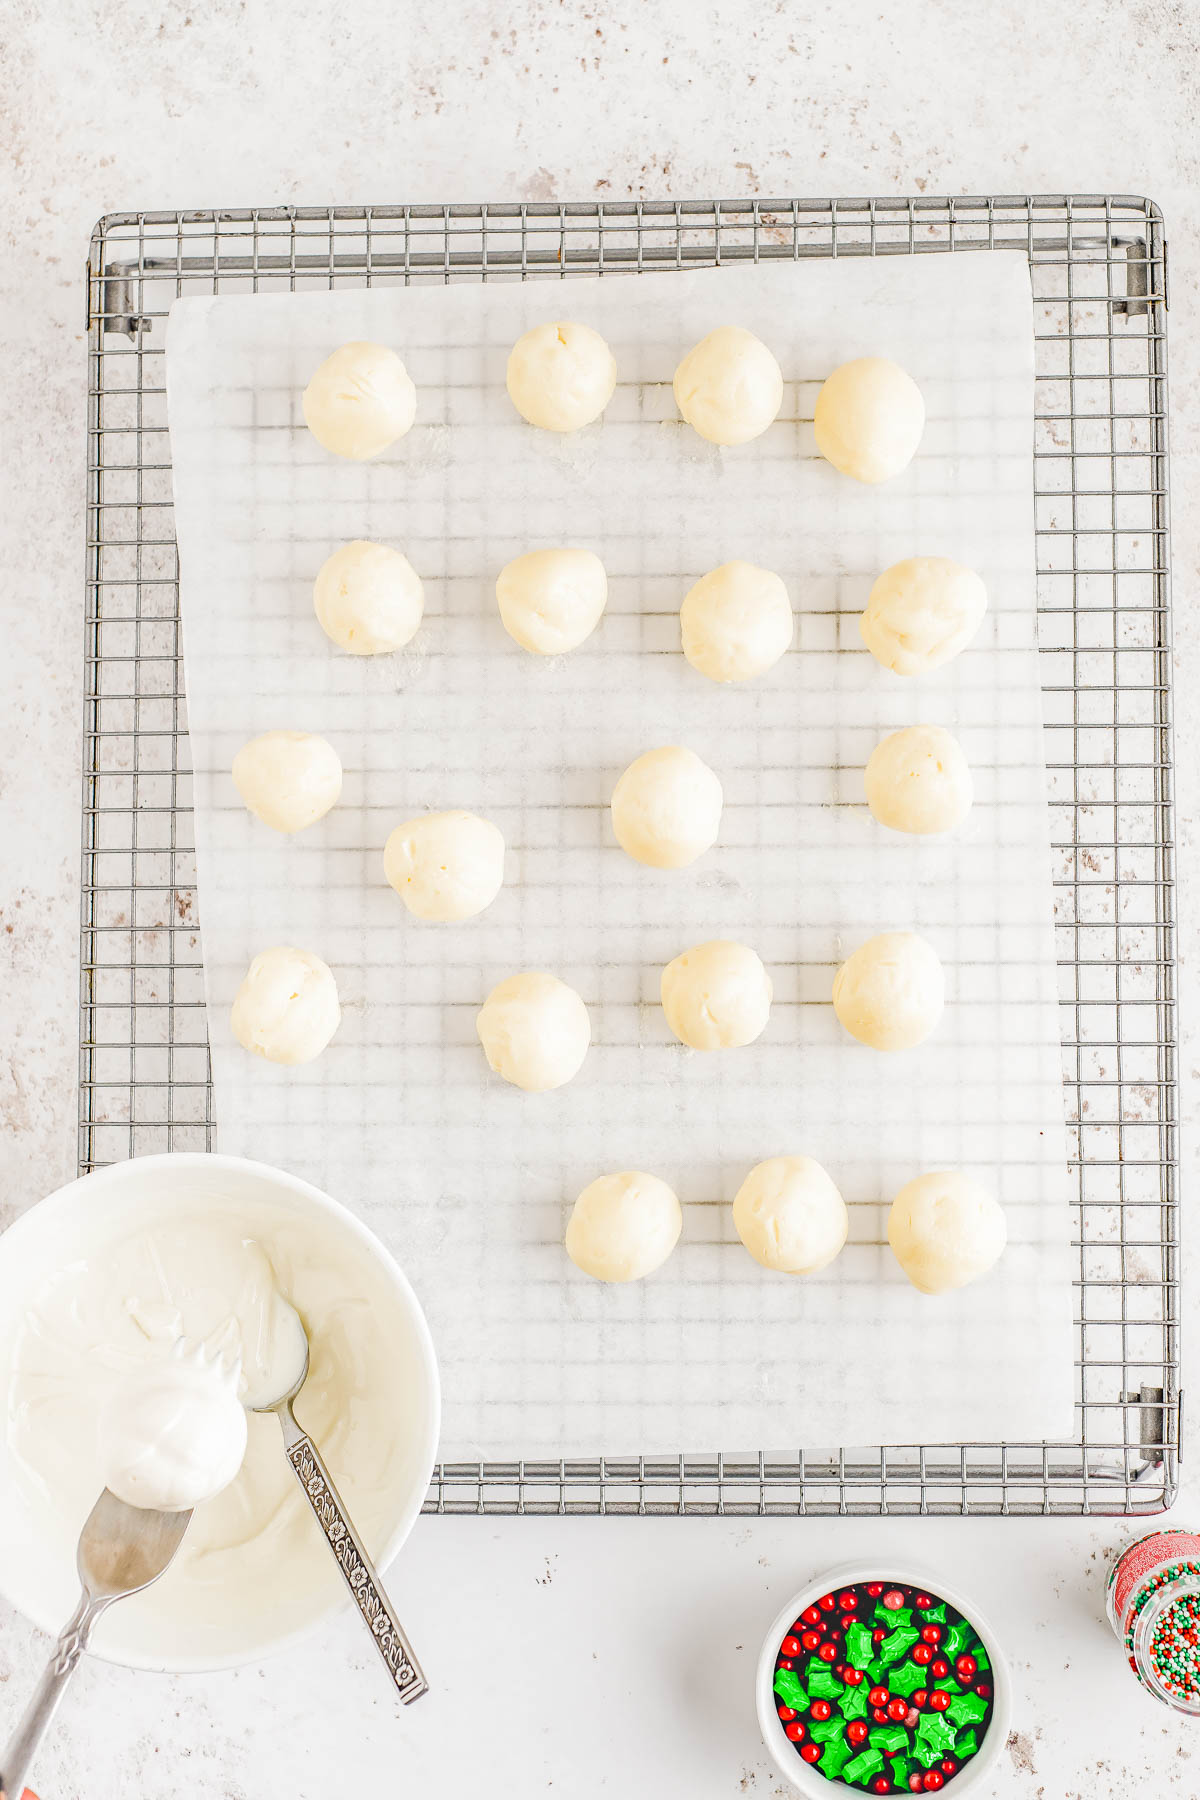 White Chocolate Truffles - Made with real butter, heavy cream, and a double dose of white chocolate in both the filling and the coating, these EASY truffles are CREAMY, decadent, and perfect for the holidays! Make this festive no-bake candy recipe for your next Christmas party, holiday entertaining, gift them to a special friend, or bring them along as a hostess gift. Everyone will appreciate these decadent little treats!